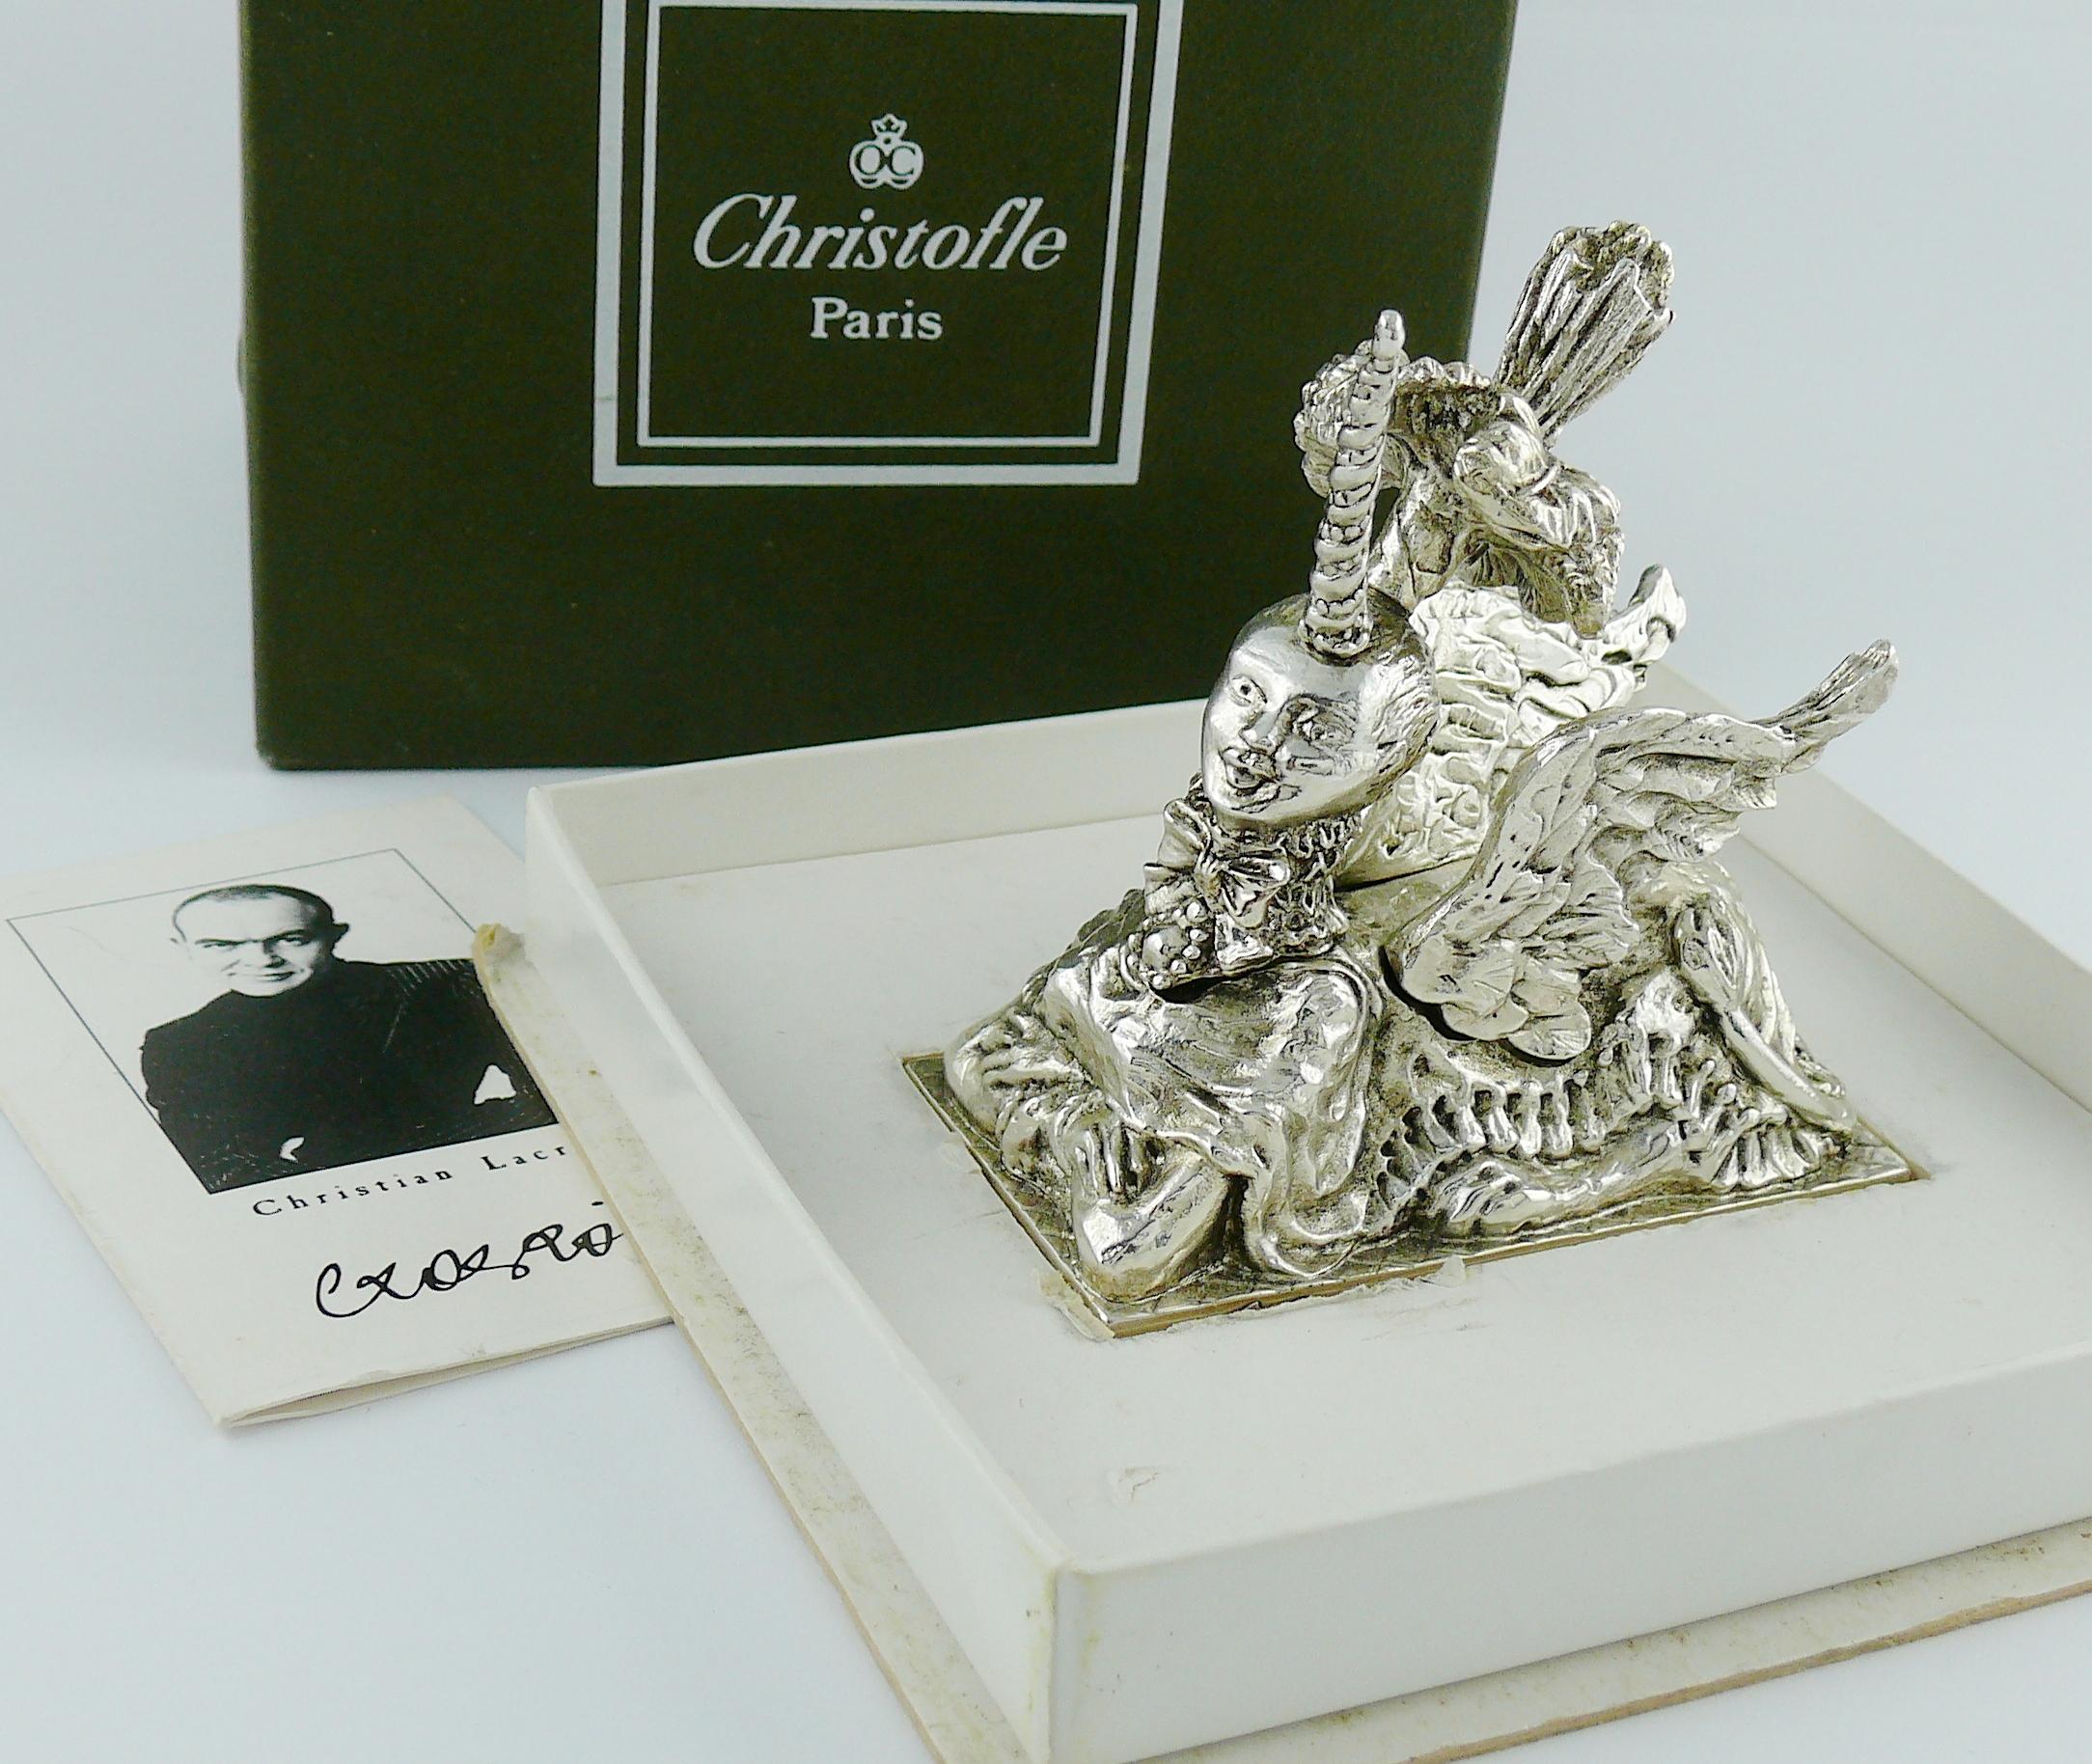 CHRISTIAN LACROIX rare 1998 limited edition silver plated unicorn paperweight.

Manufactured by CHRISTOFLE Paris.

Signed CL and dated 1998.

Indicative measurements : base approx. 6.8 cm x 3.7 cm (2.68 inches x 1.46 inches) / max. height approx.